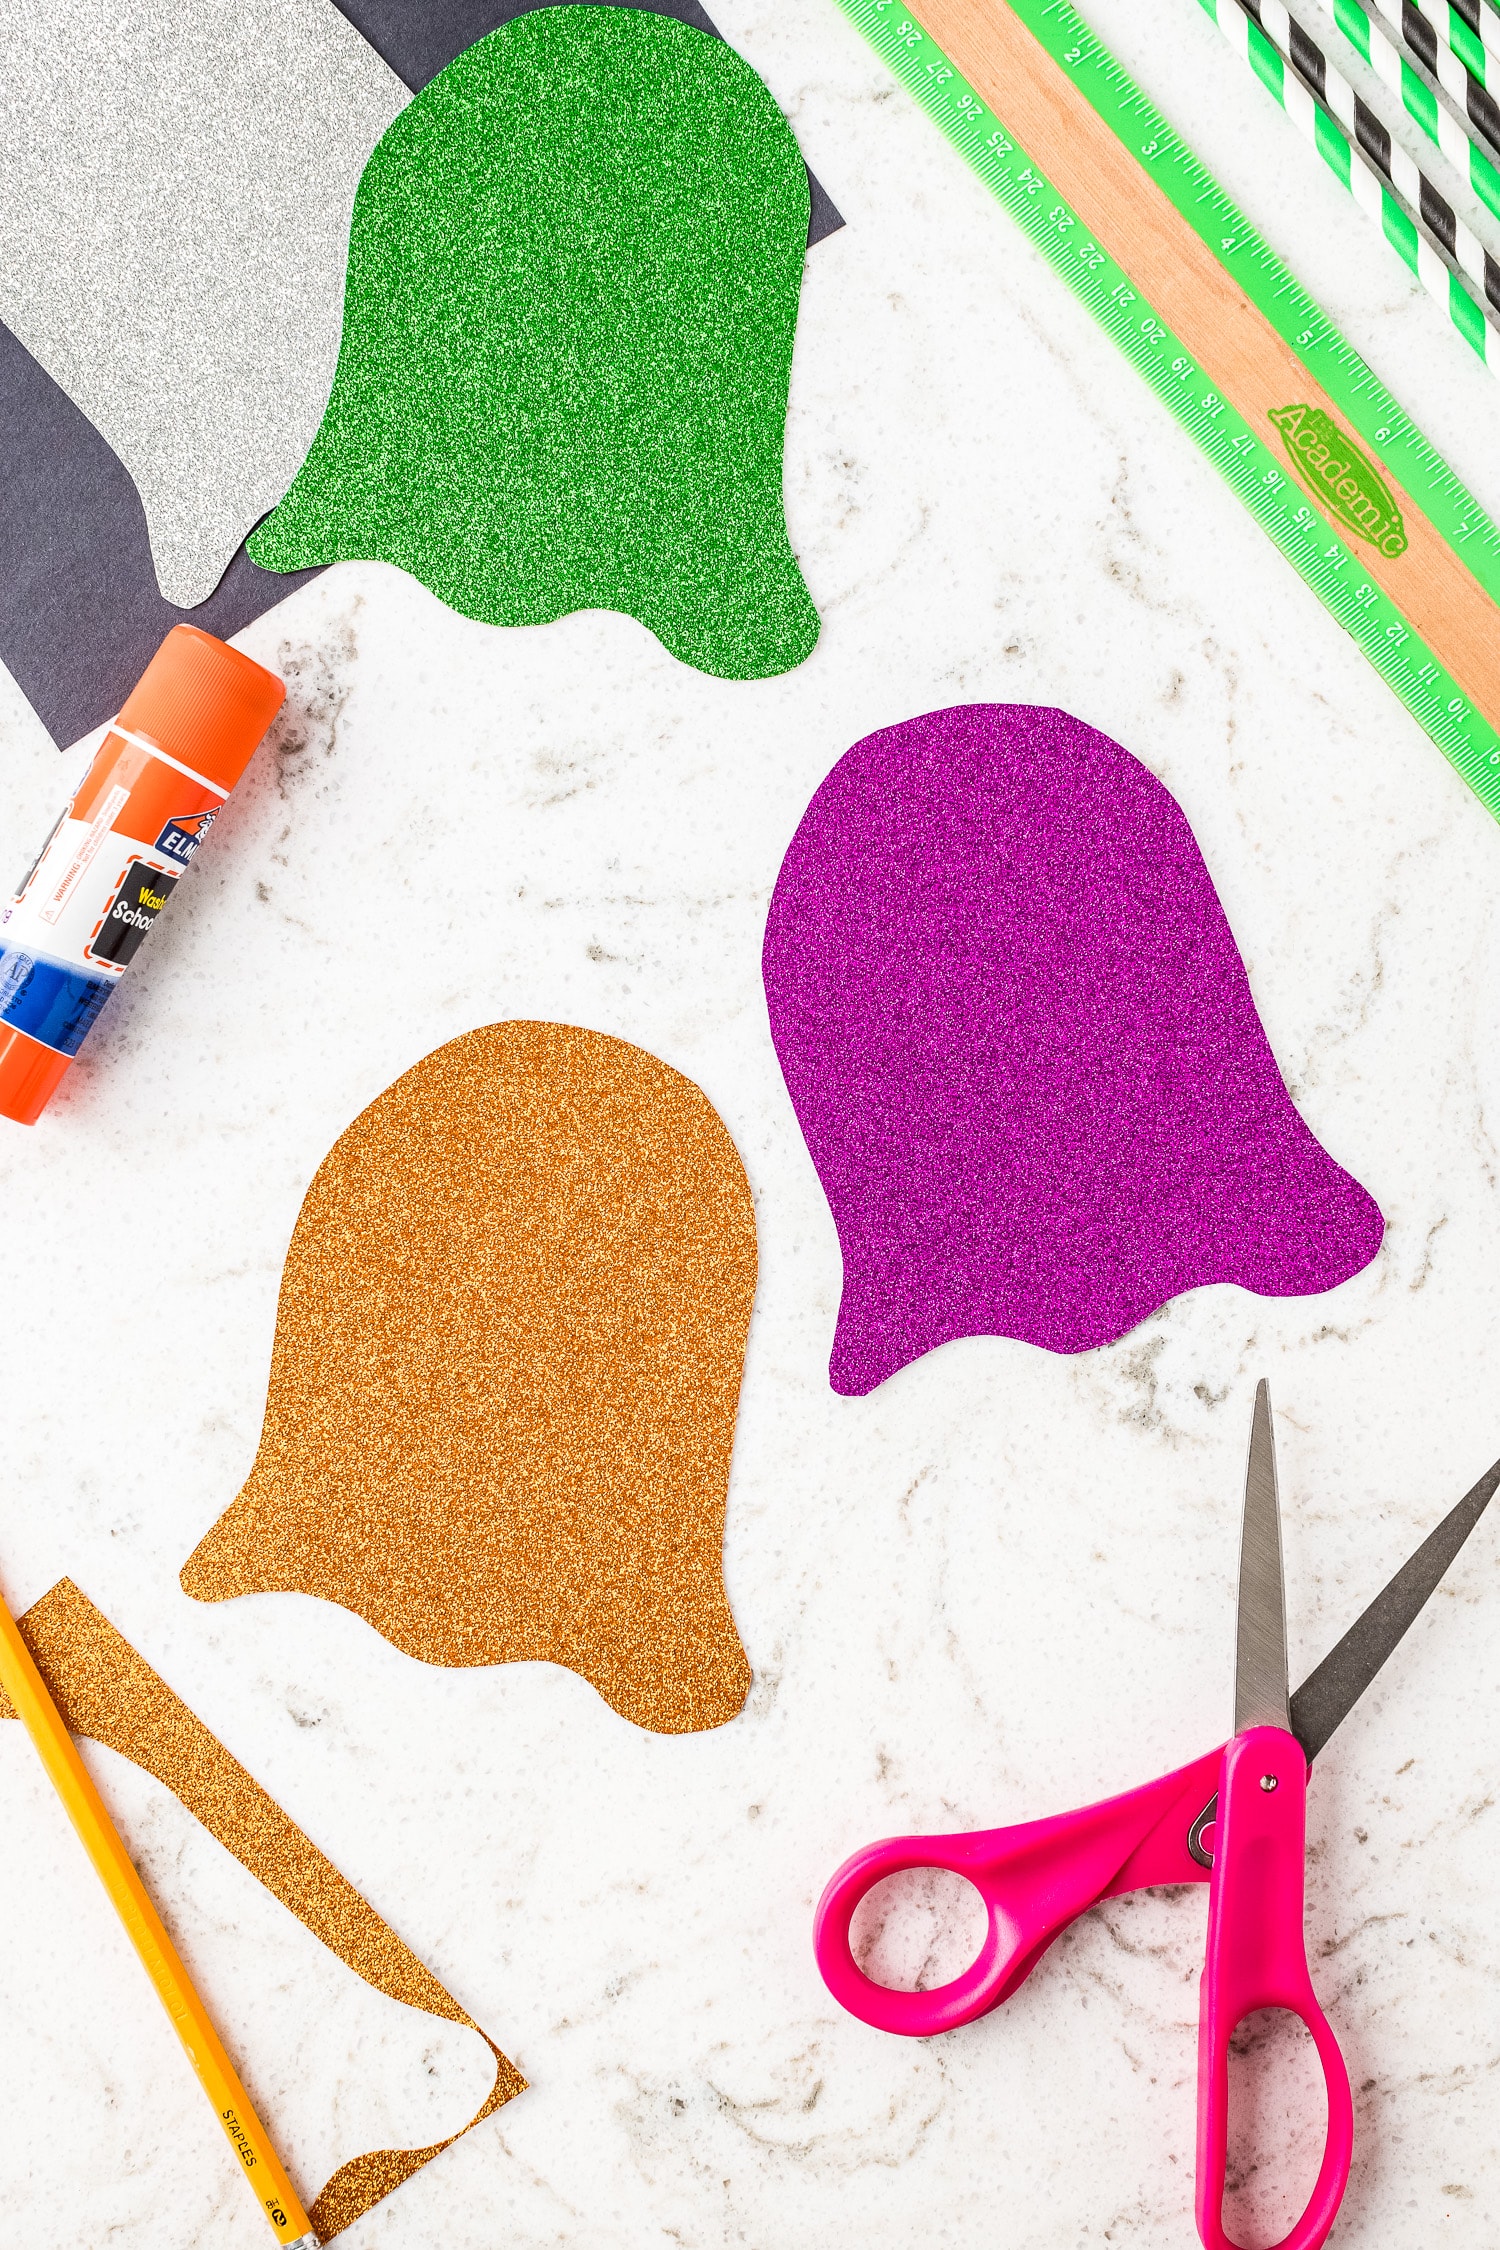 Ghost shape cut out of green, orange and purple glitter cardstock